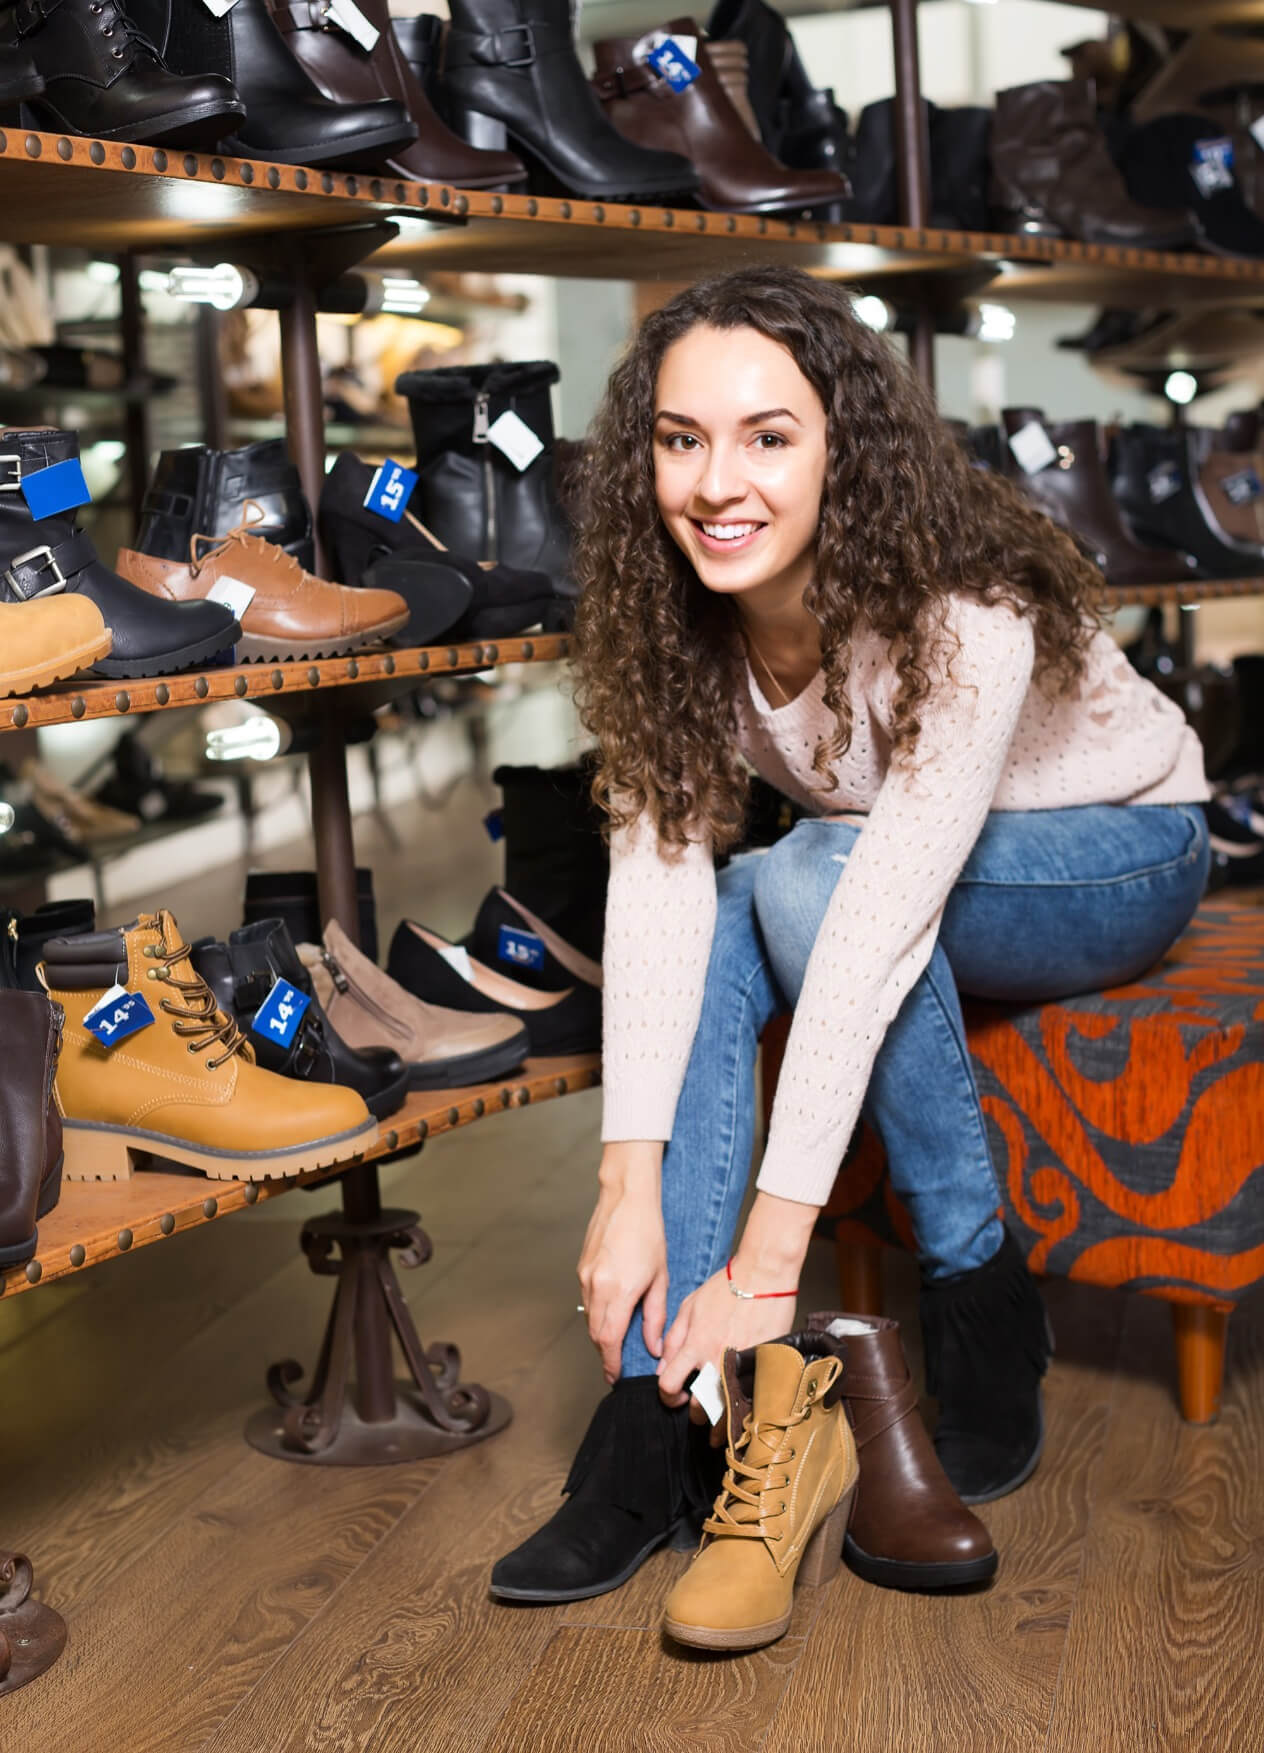 A smiling woman trying on shoes